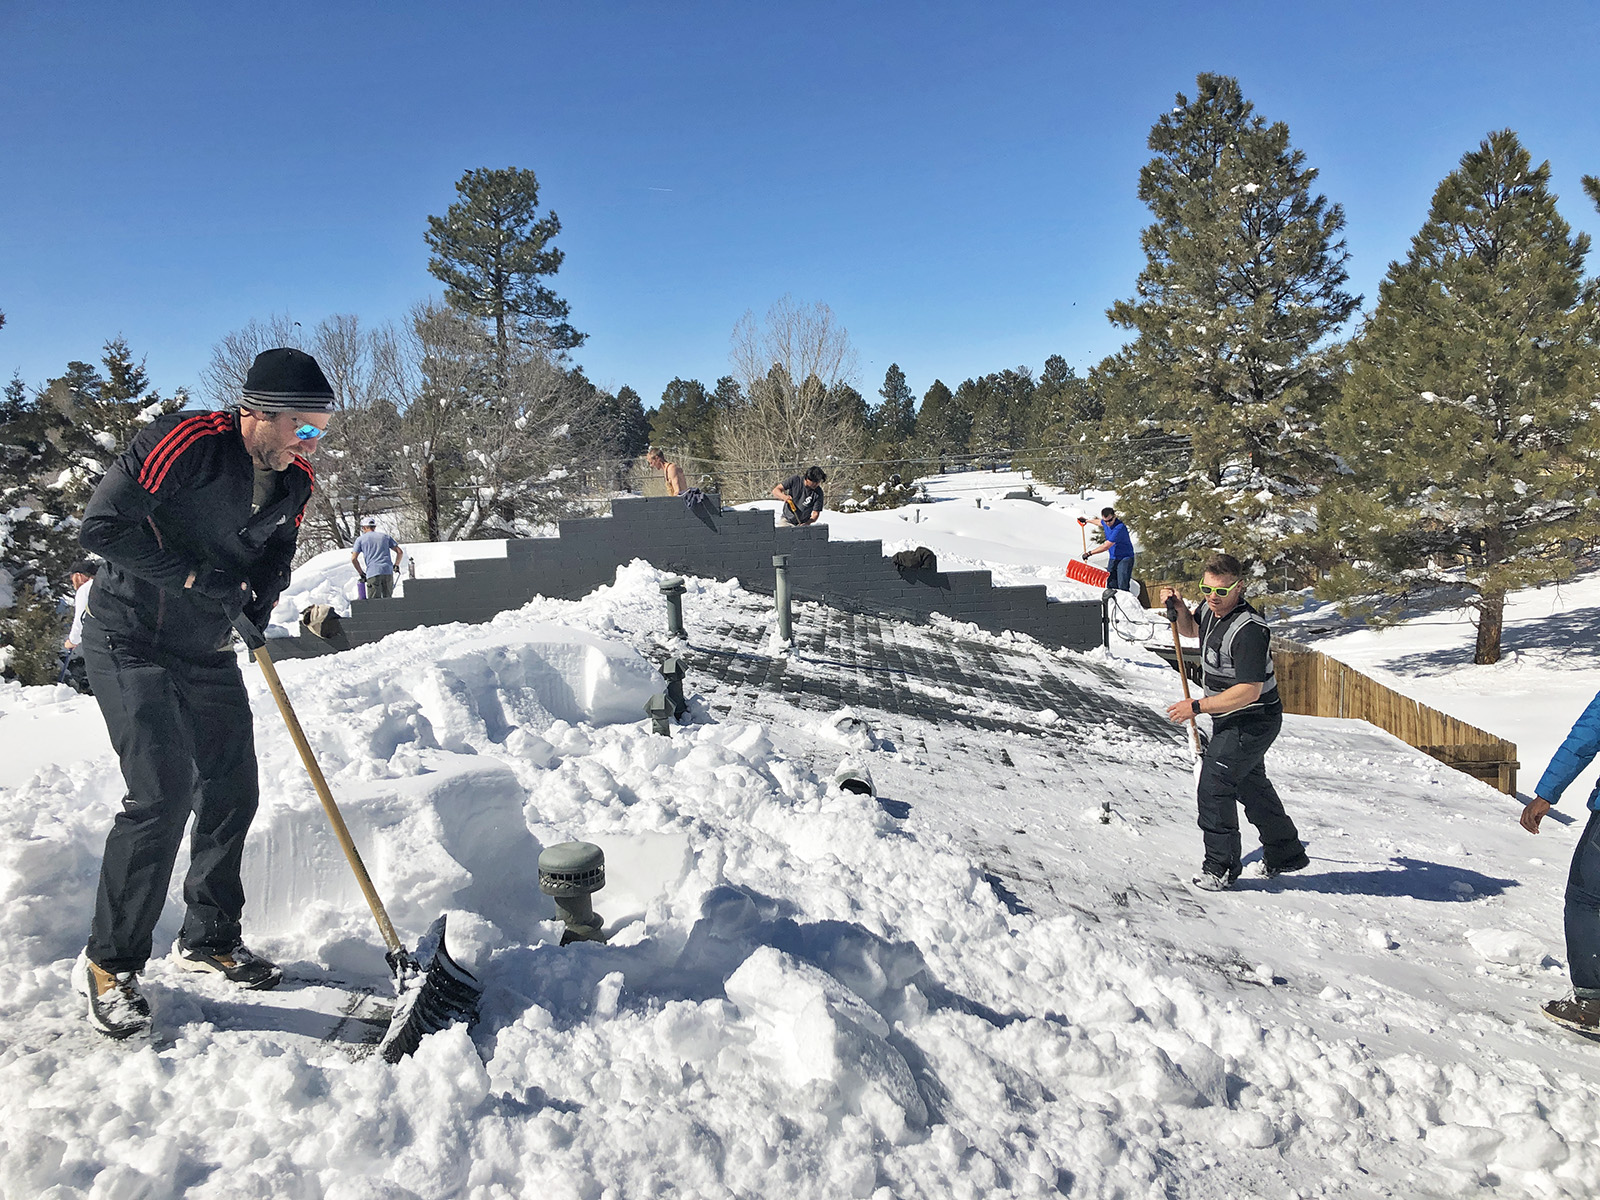 Roof top snow removal from homes in Flagstaff Arizona